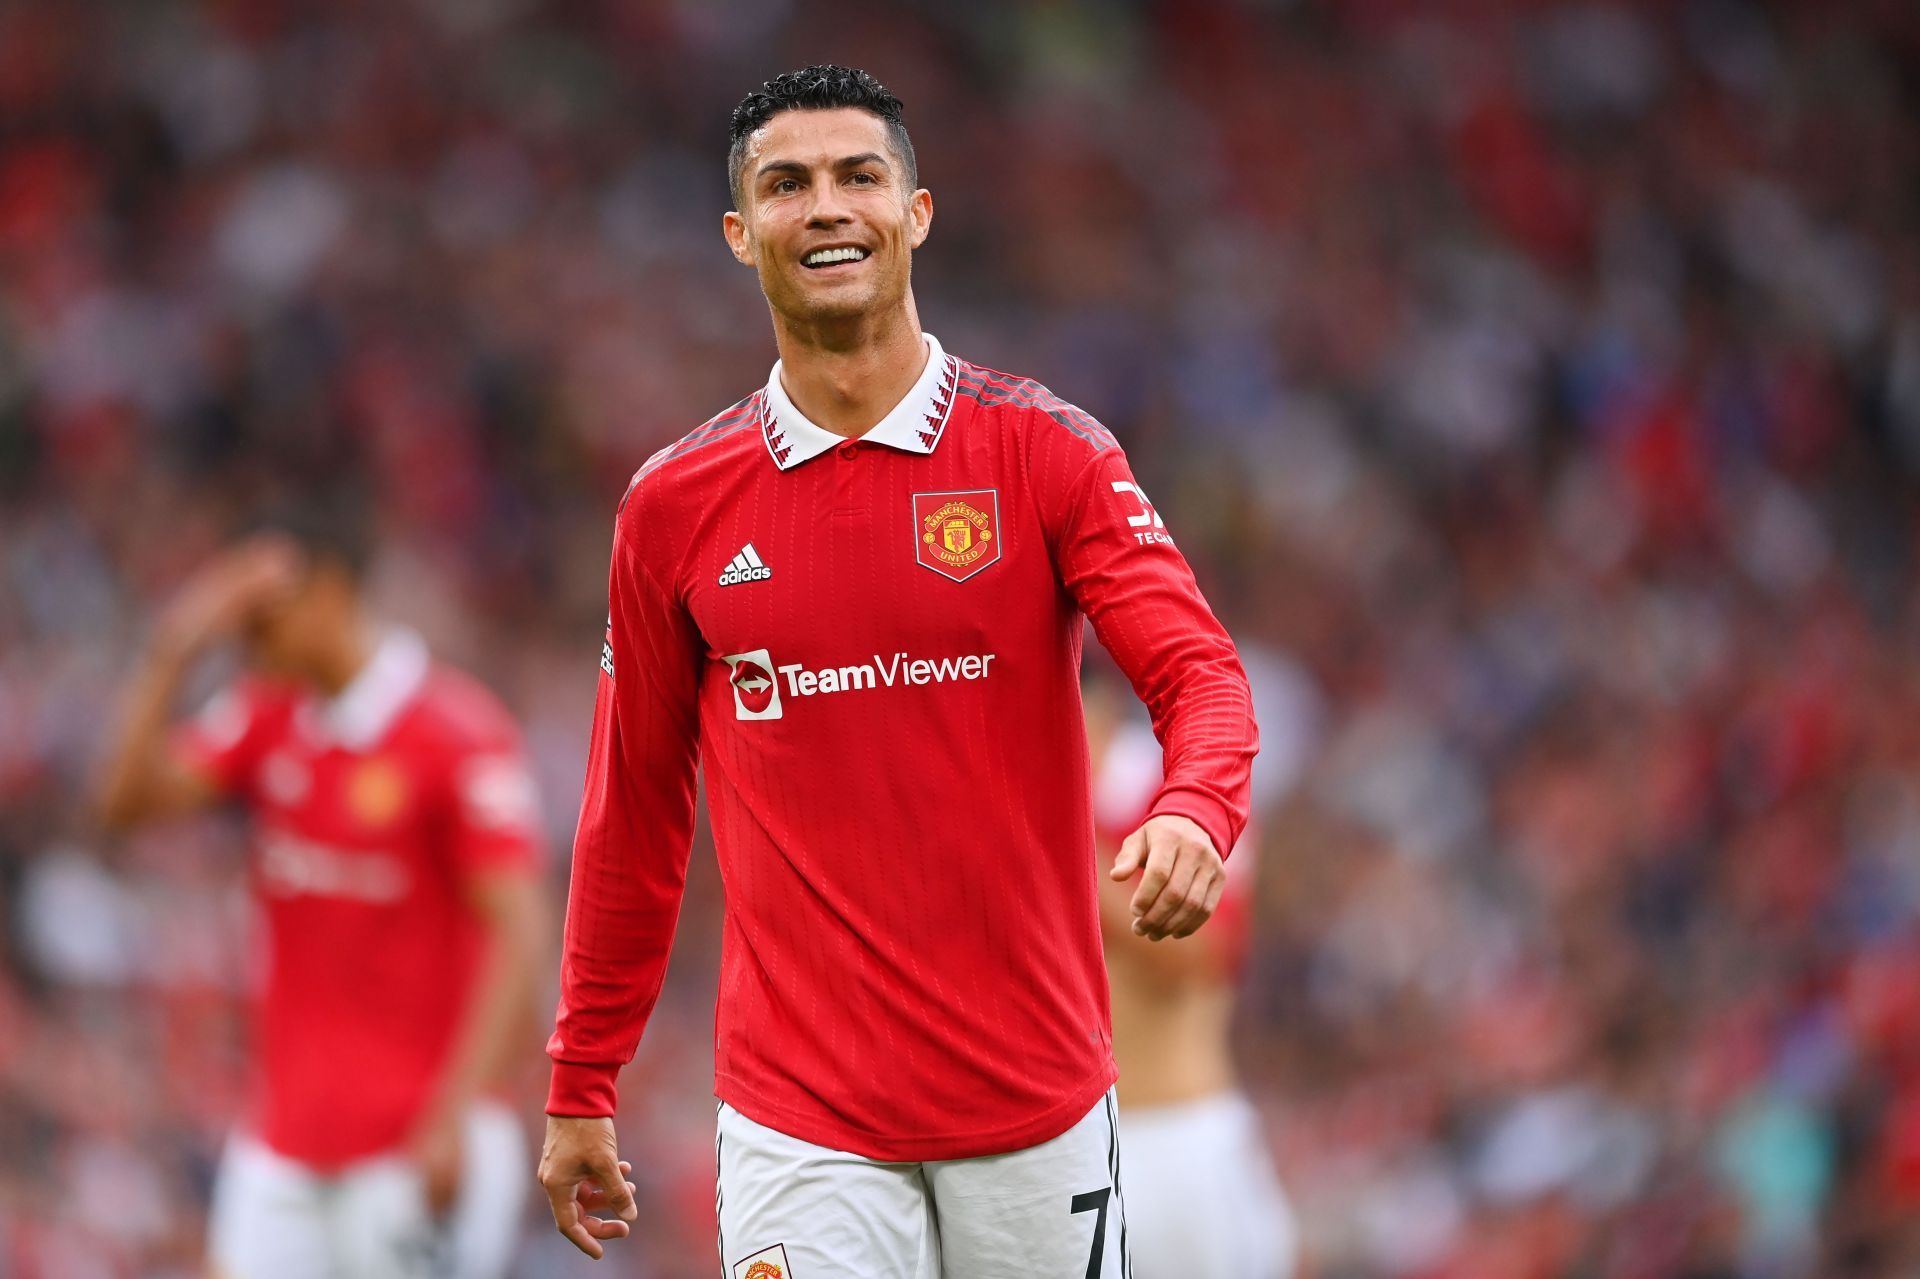 Ronaldo is still without a goal in the Premier League